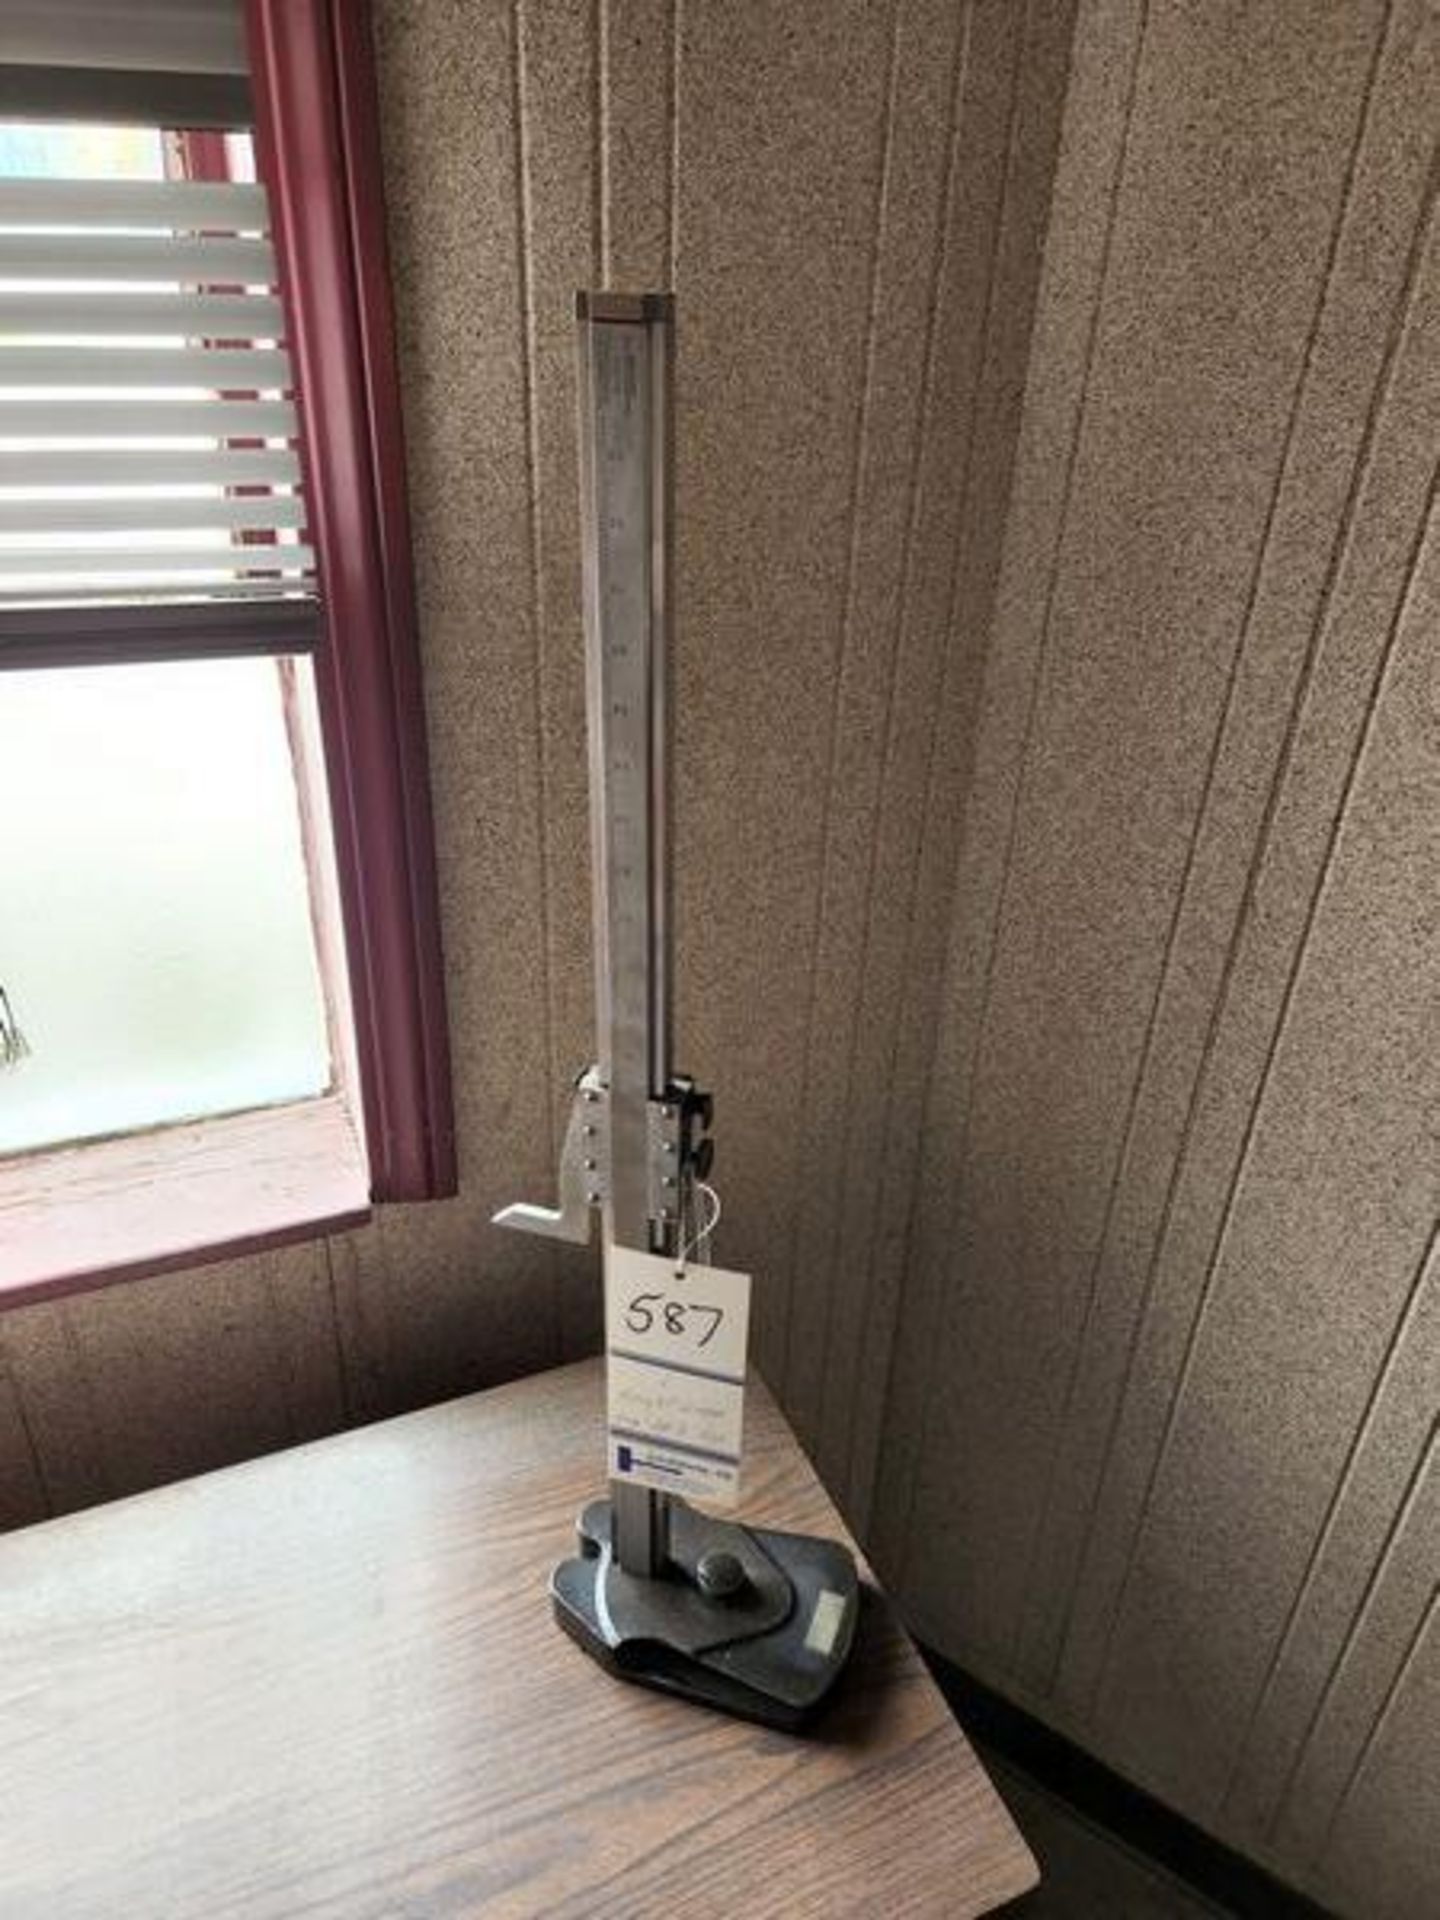 HEIGHT GAGE, 26 1/2" HIGH